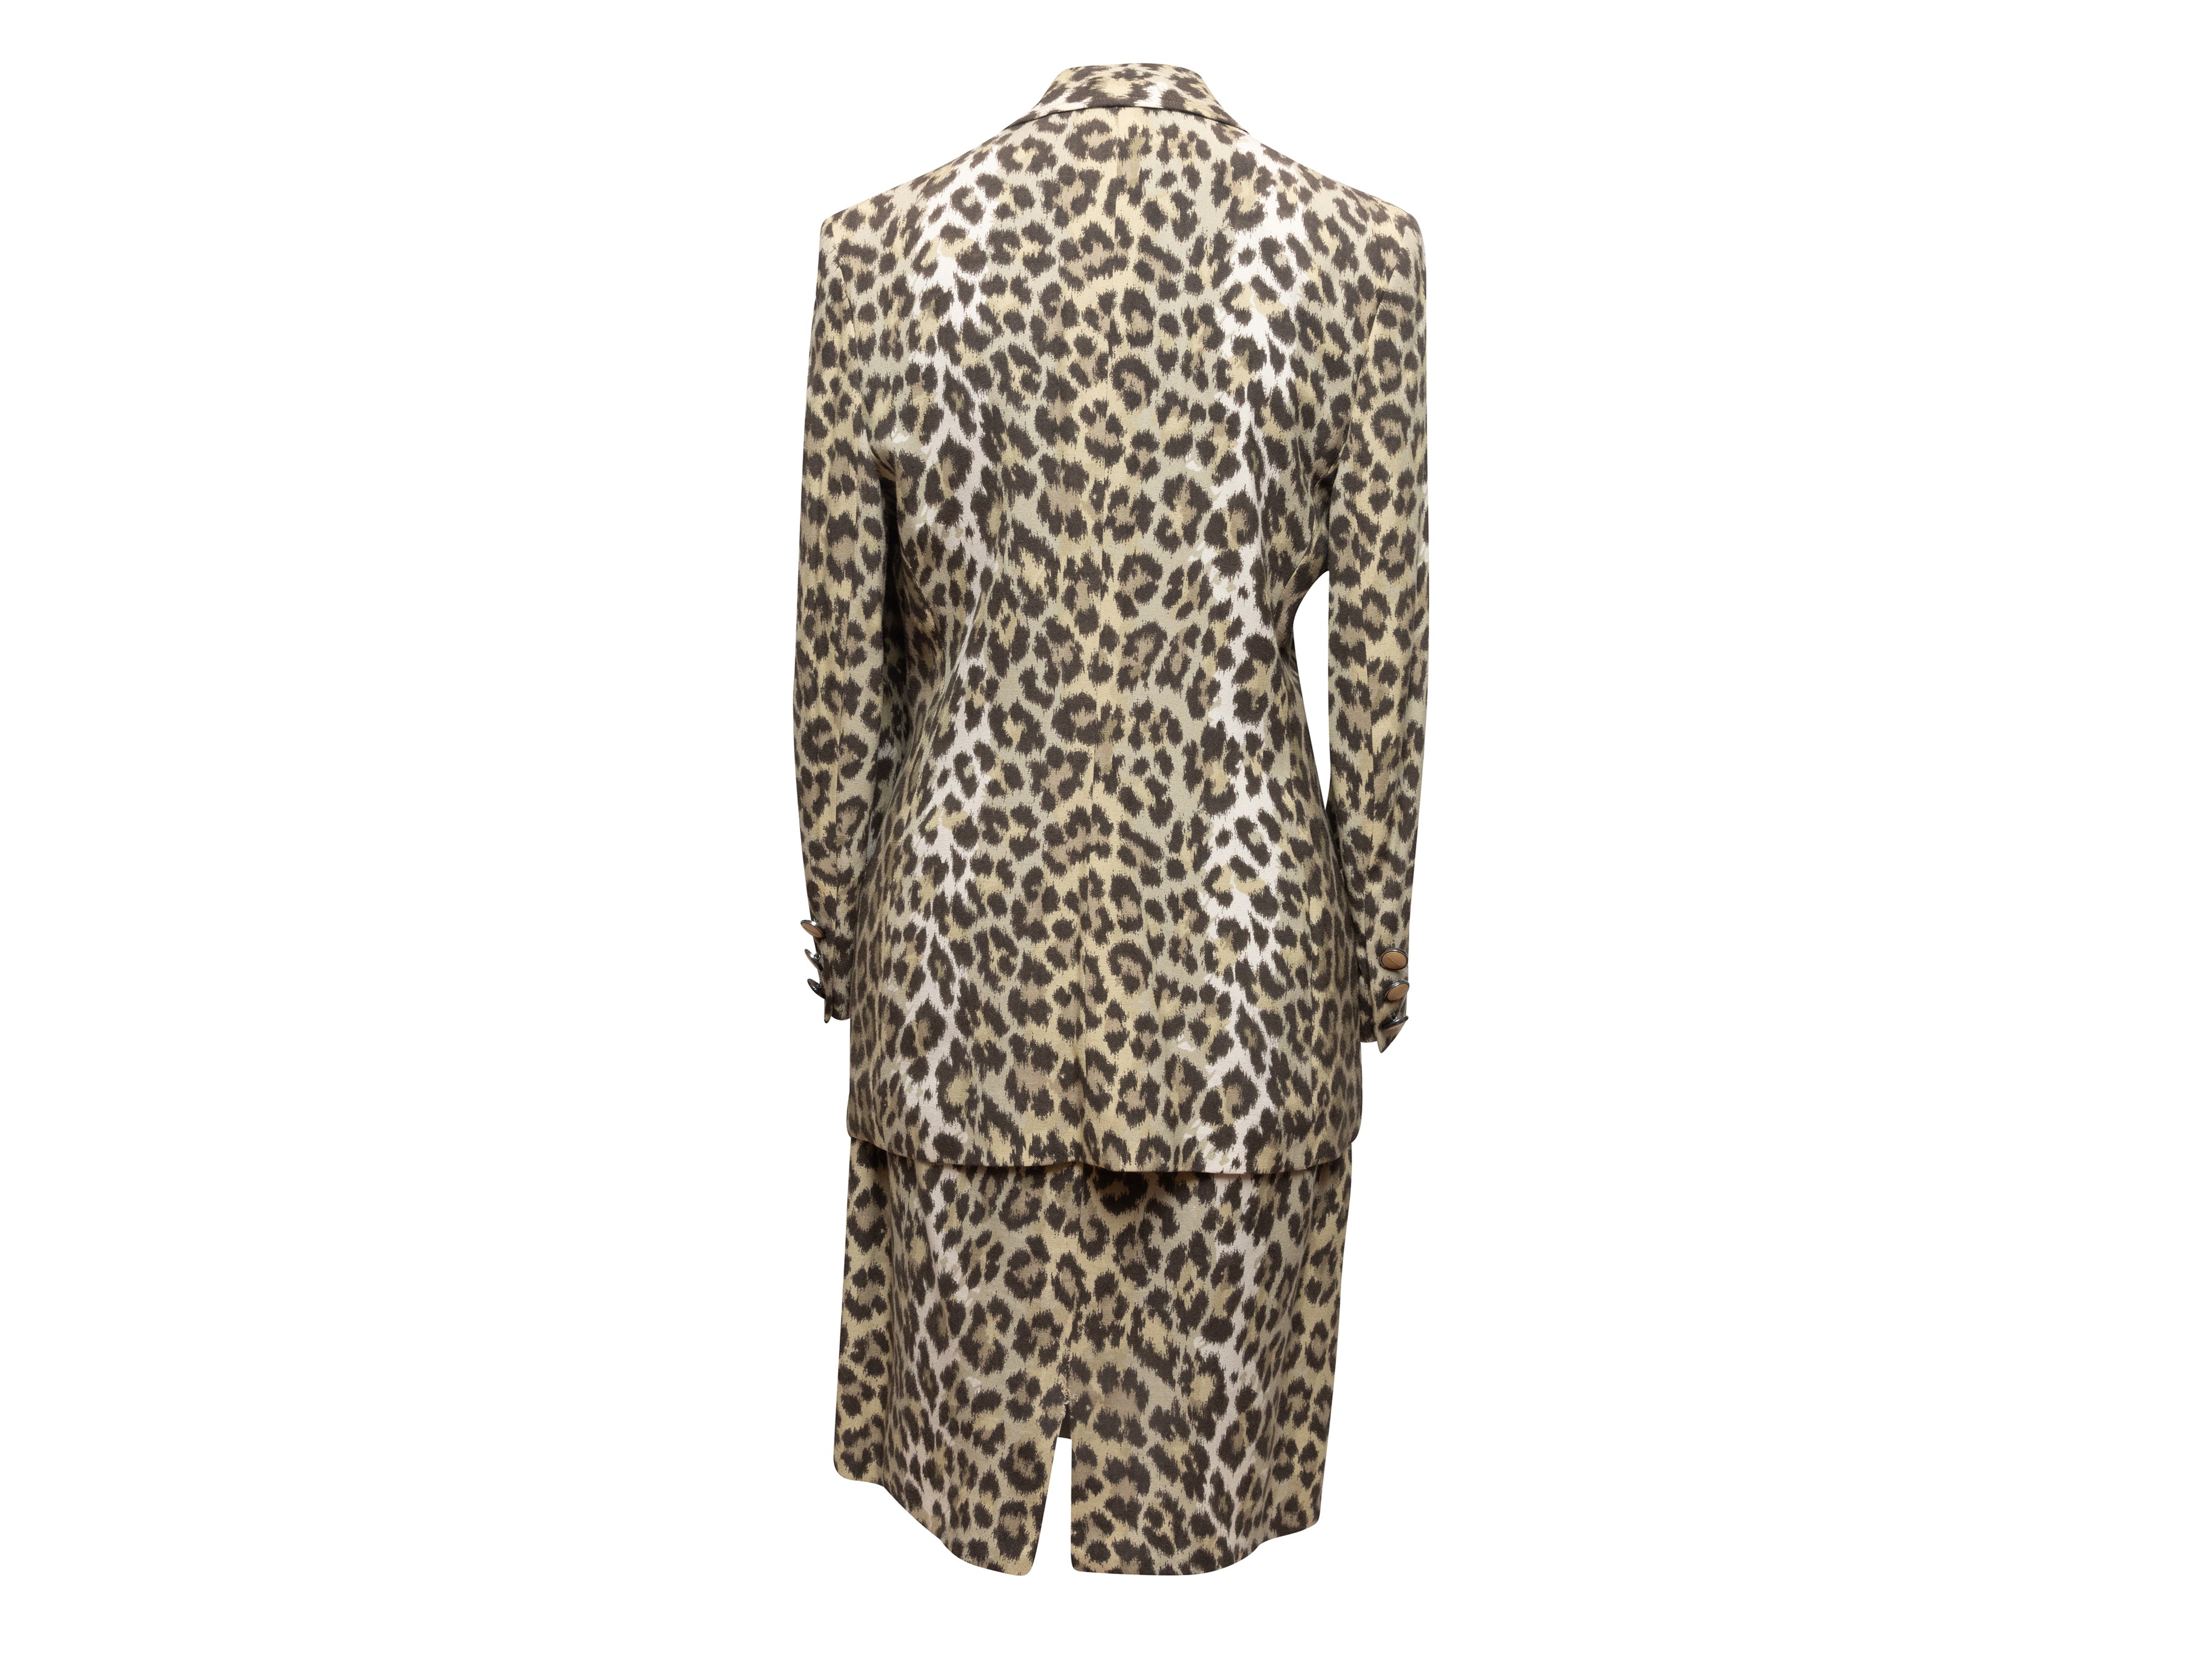 DOLCE GABBANA Leopard Print Skirt Suit 40 More Than You Can